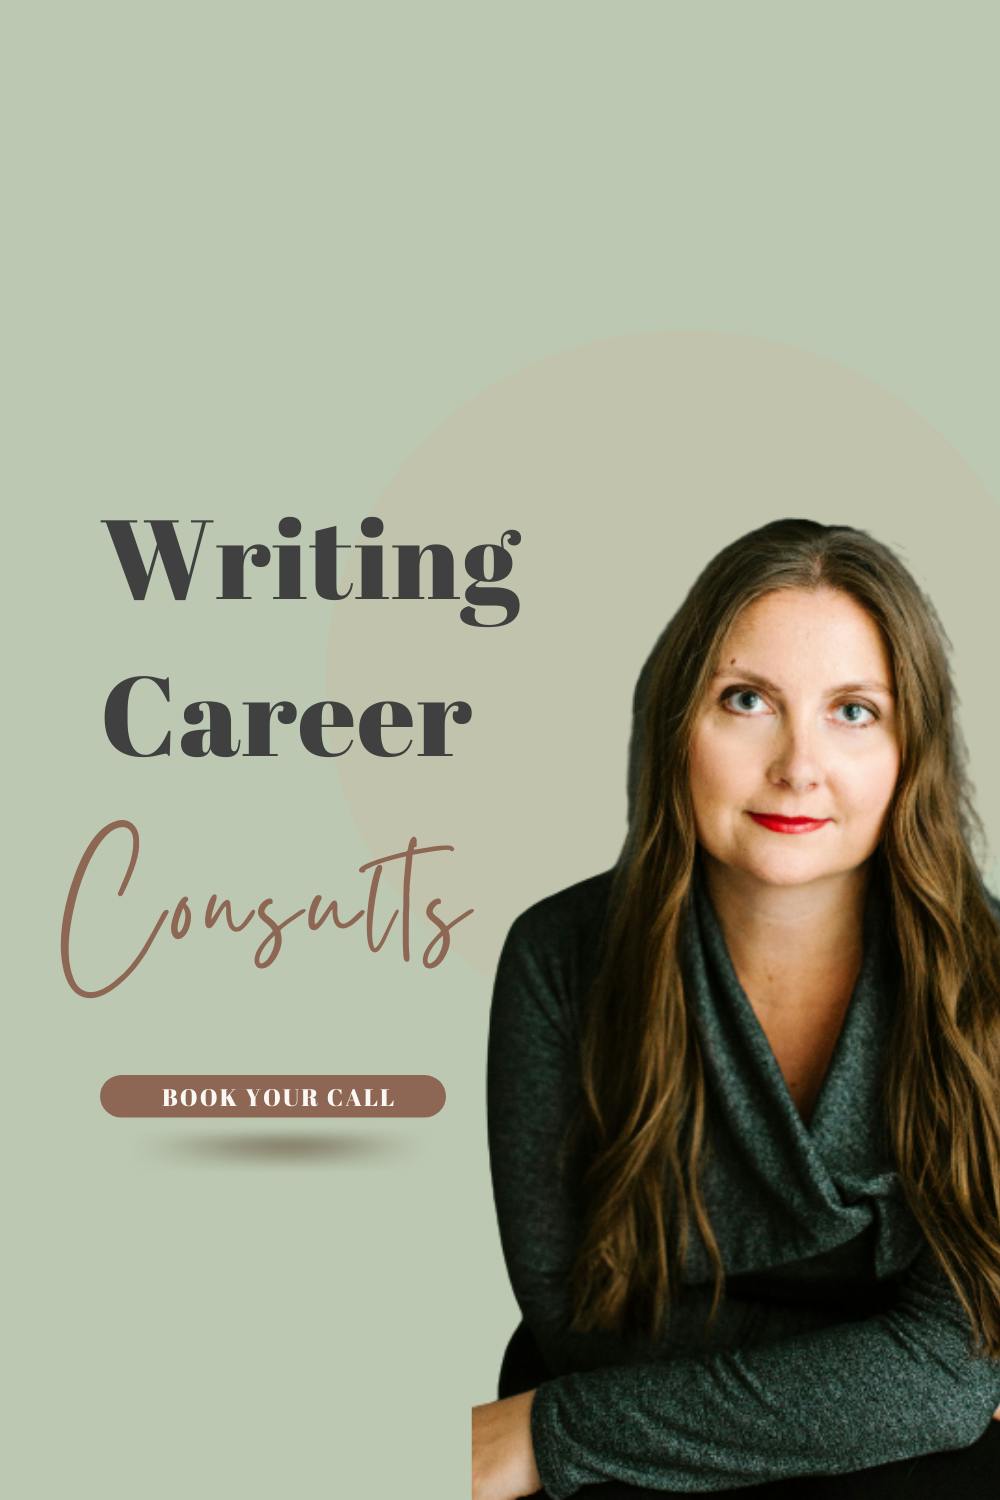 Writing Career Consults